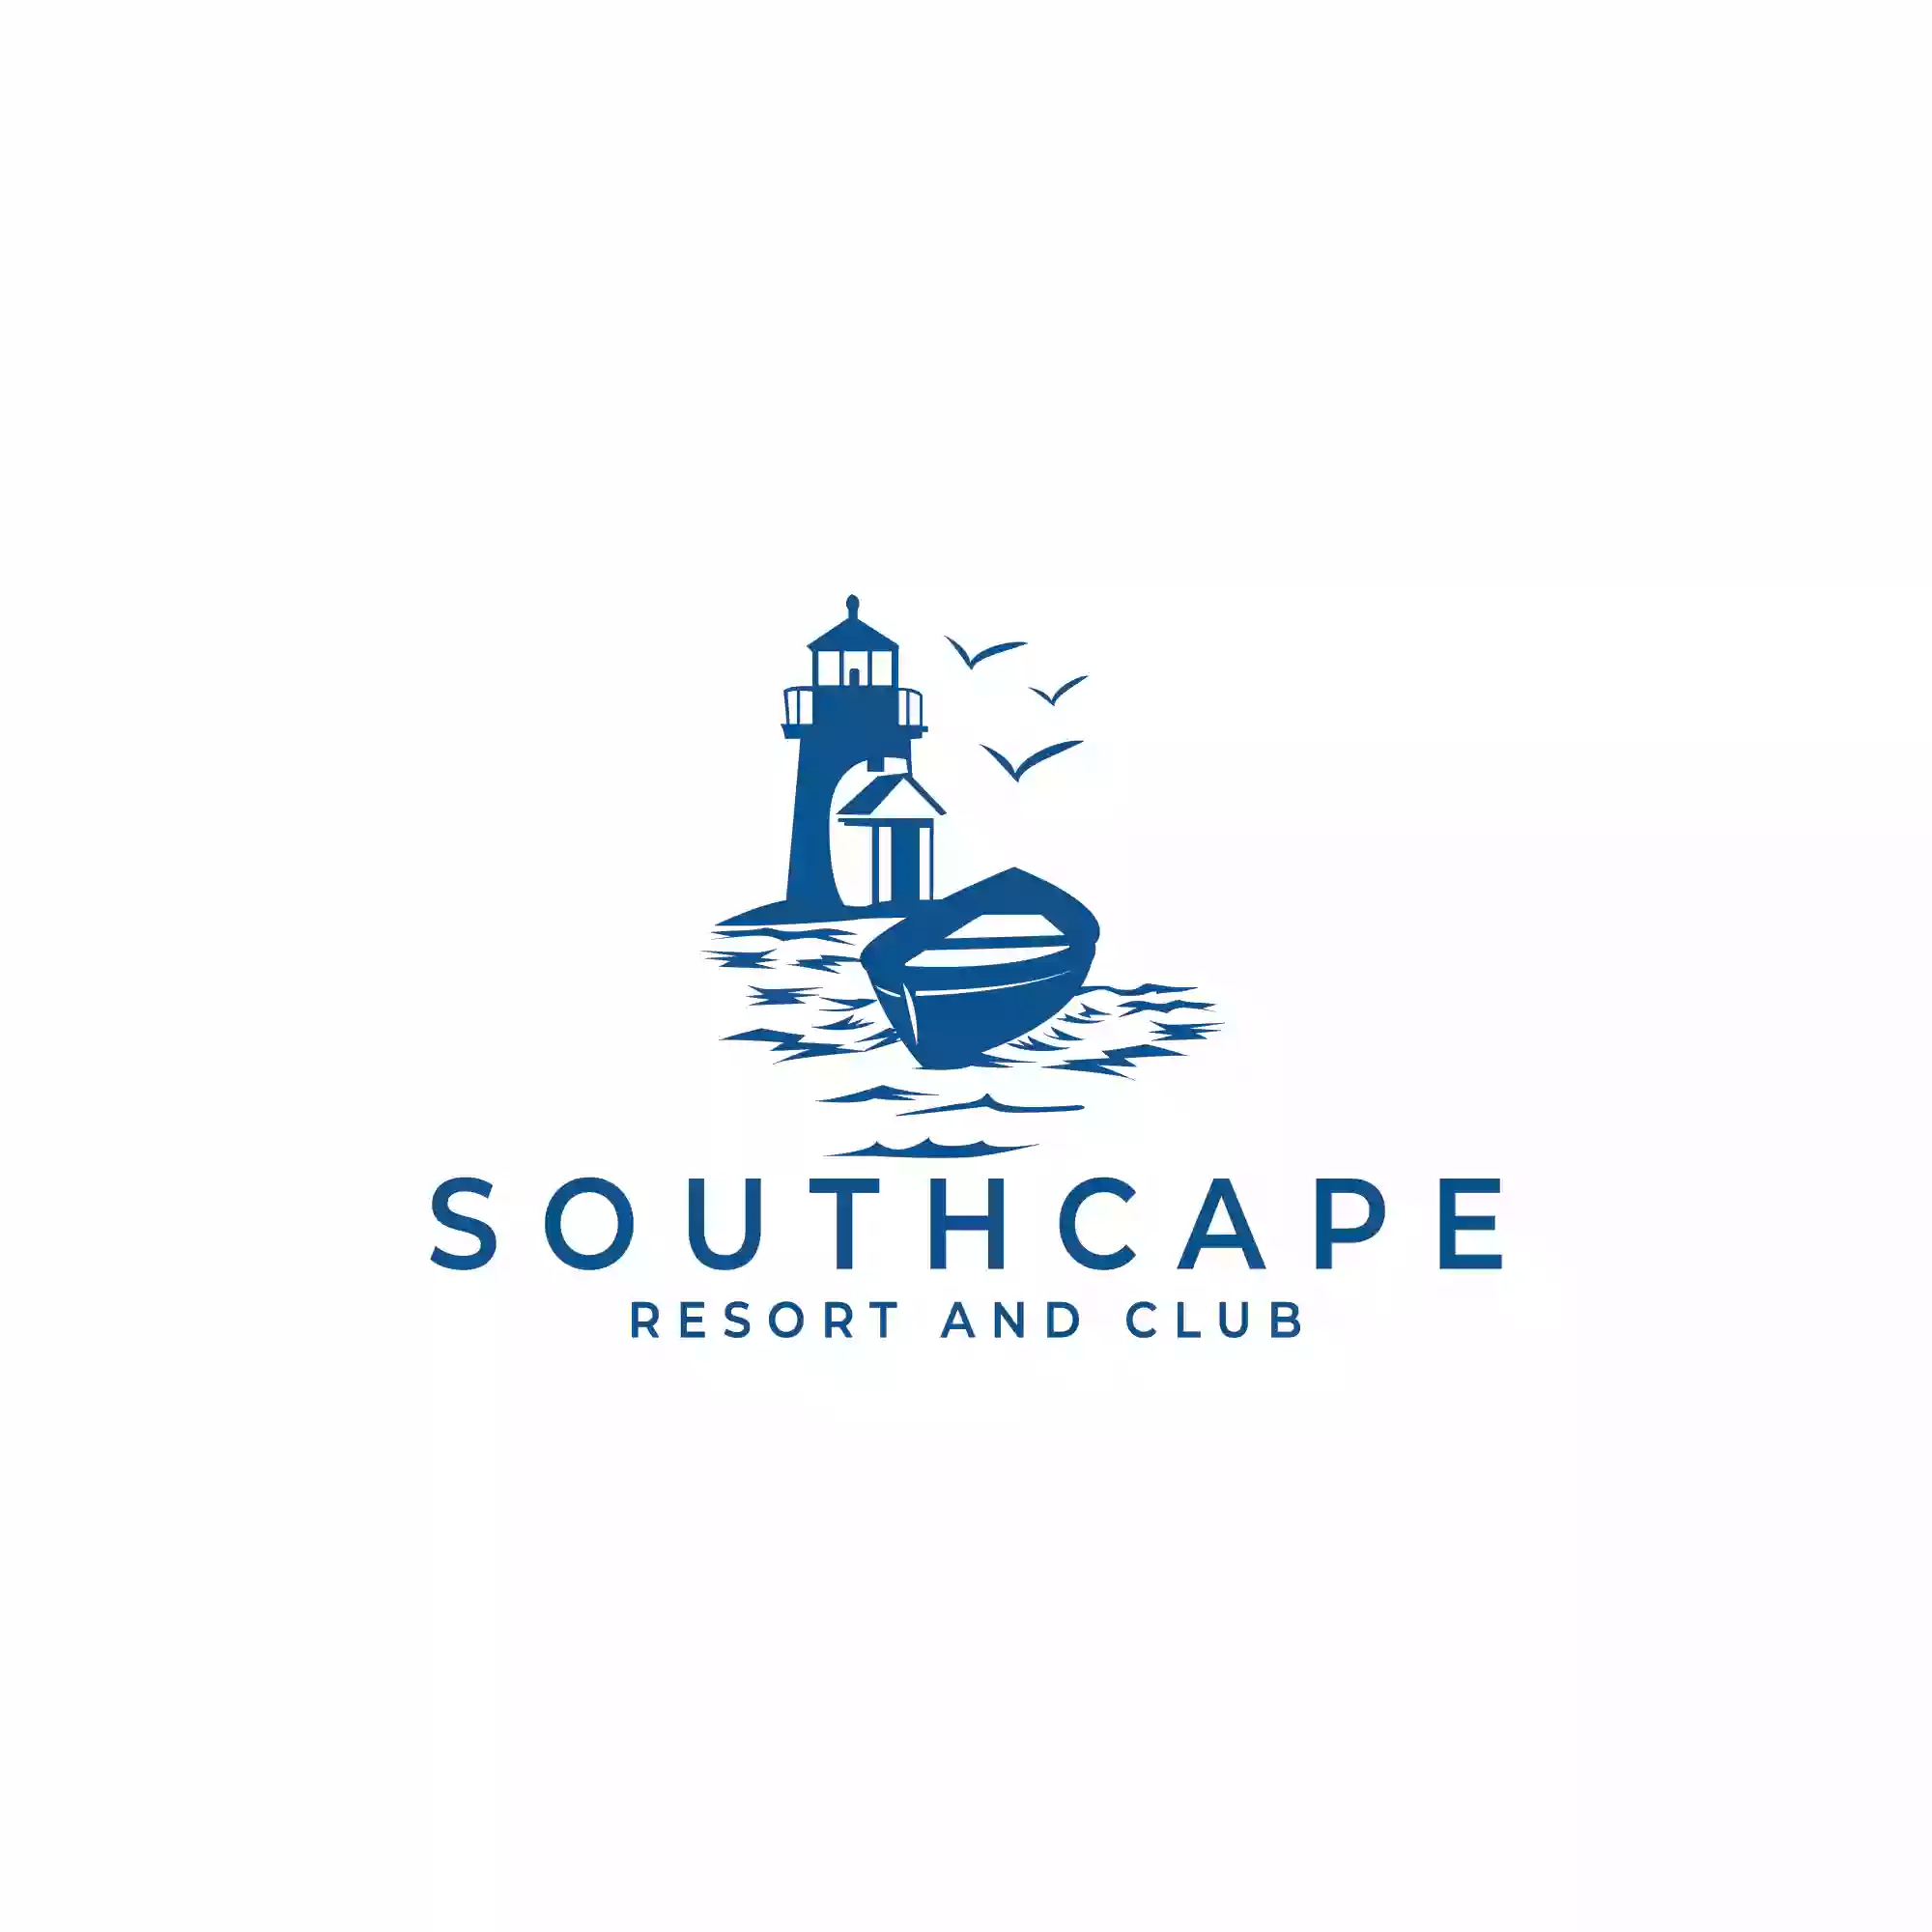 Southcape Resort and Club